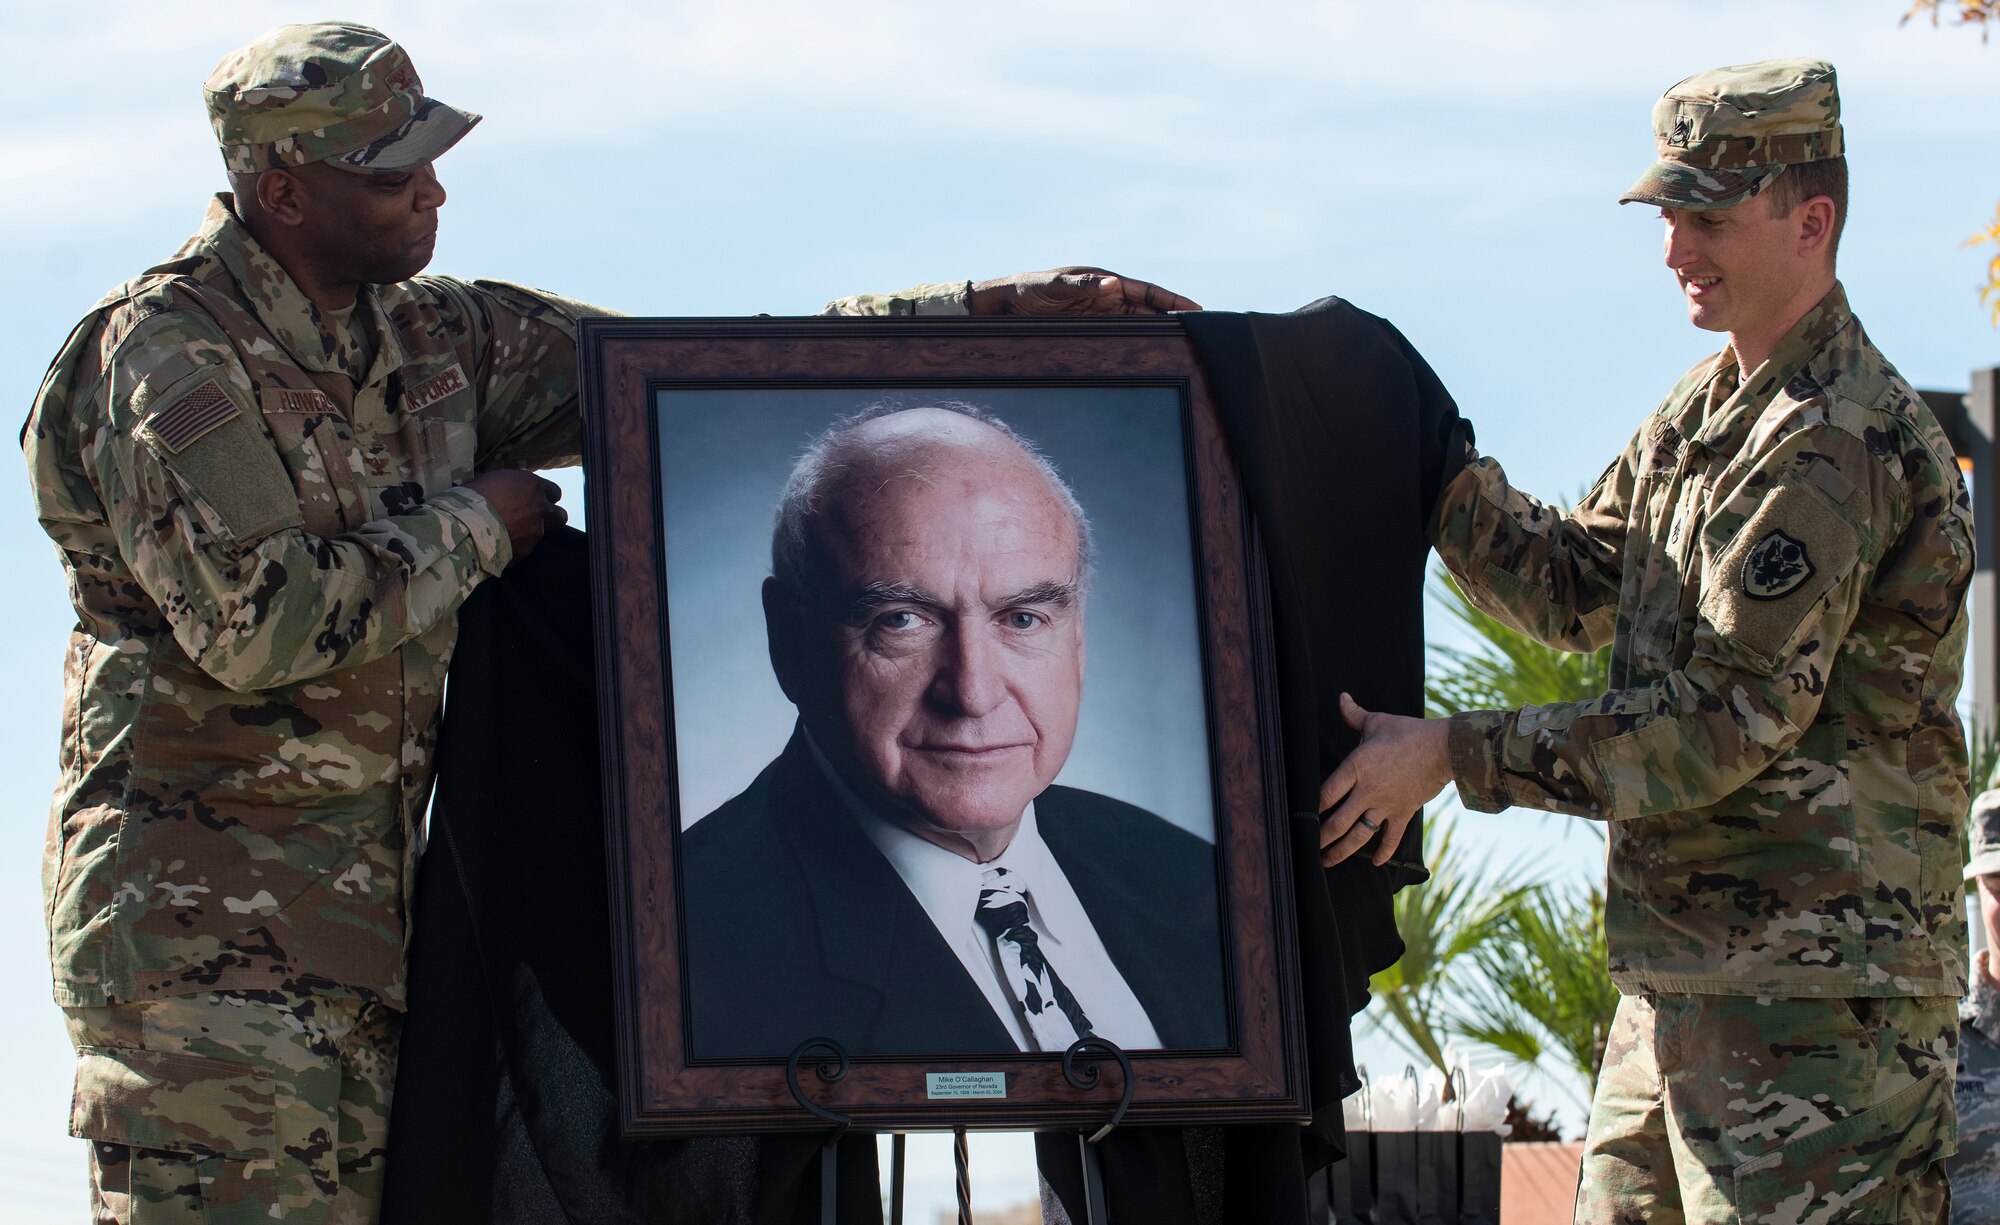 Col. Alfred Flowers, 99th Medical Group commander, and U.S. Army Staff Sgt. Brian O’Callaghan reveal a portrait of O’Callaghan during a ceremony celebrating the Mike O’Callaghan Military Medical Center’s 25th Anniversary on Nellis Air Force Base, Nevada, Nov. 12, 2019. The portrait will hang in the MOMMC to honor the centers namesake. (U.S. Air Force photo by Senior Airman Kevin Tanenbaum)